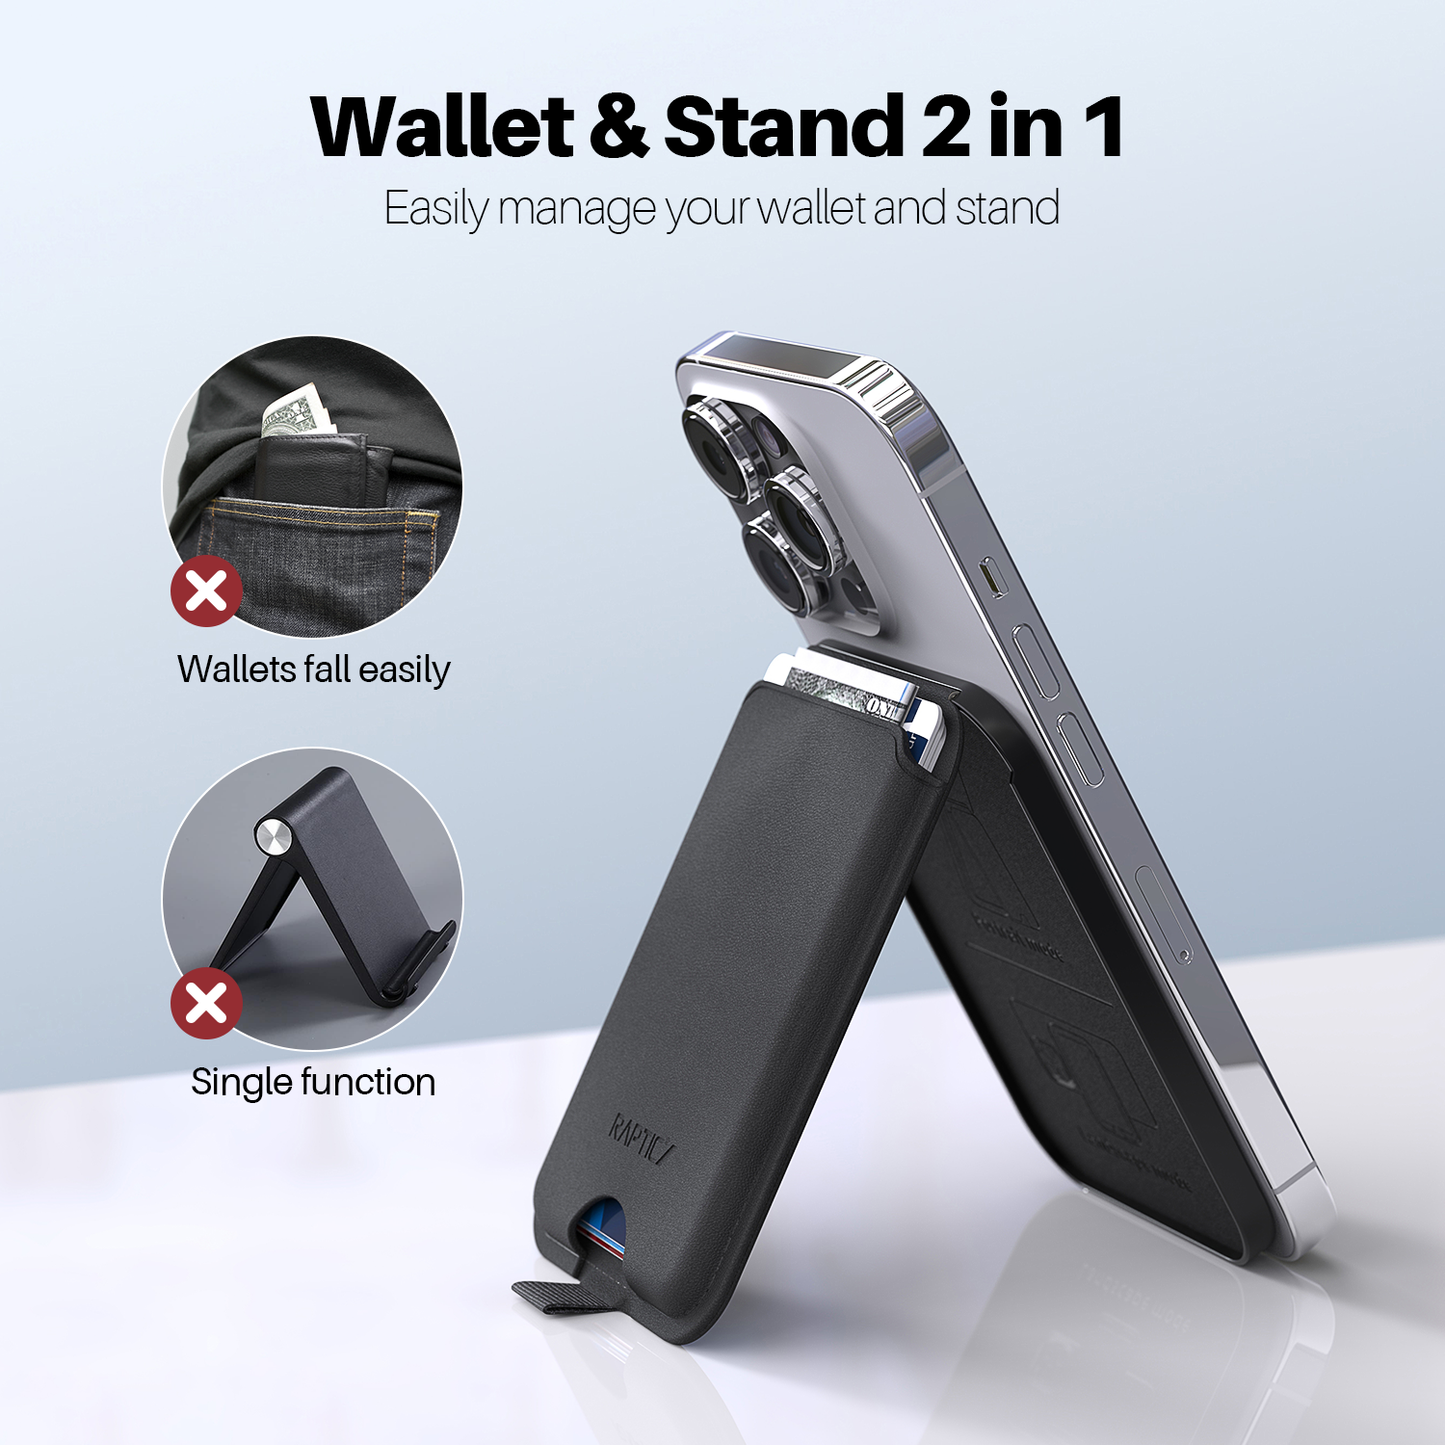 Raptic iPhone Wallet MagSafe KickStand is the magnetic wallet and stand for iPhone 11.